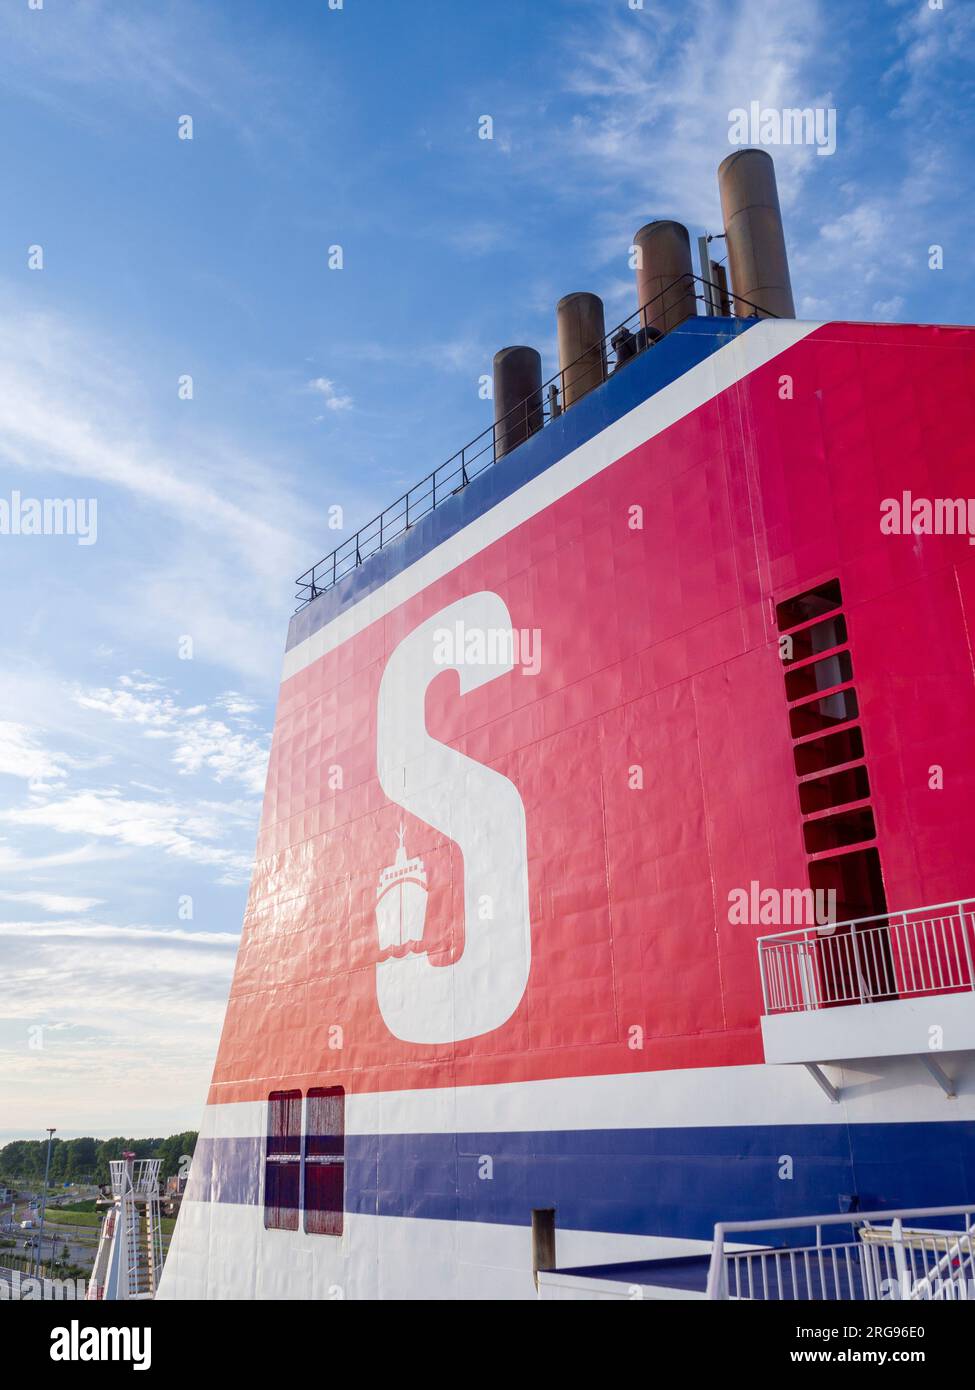 The funnel of a Stena Line ferry on the Hook of Holland to Harwich route. Stock Photo